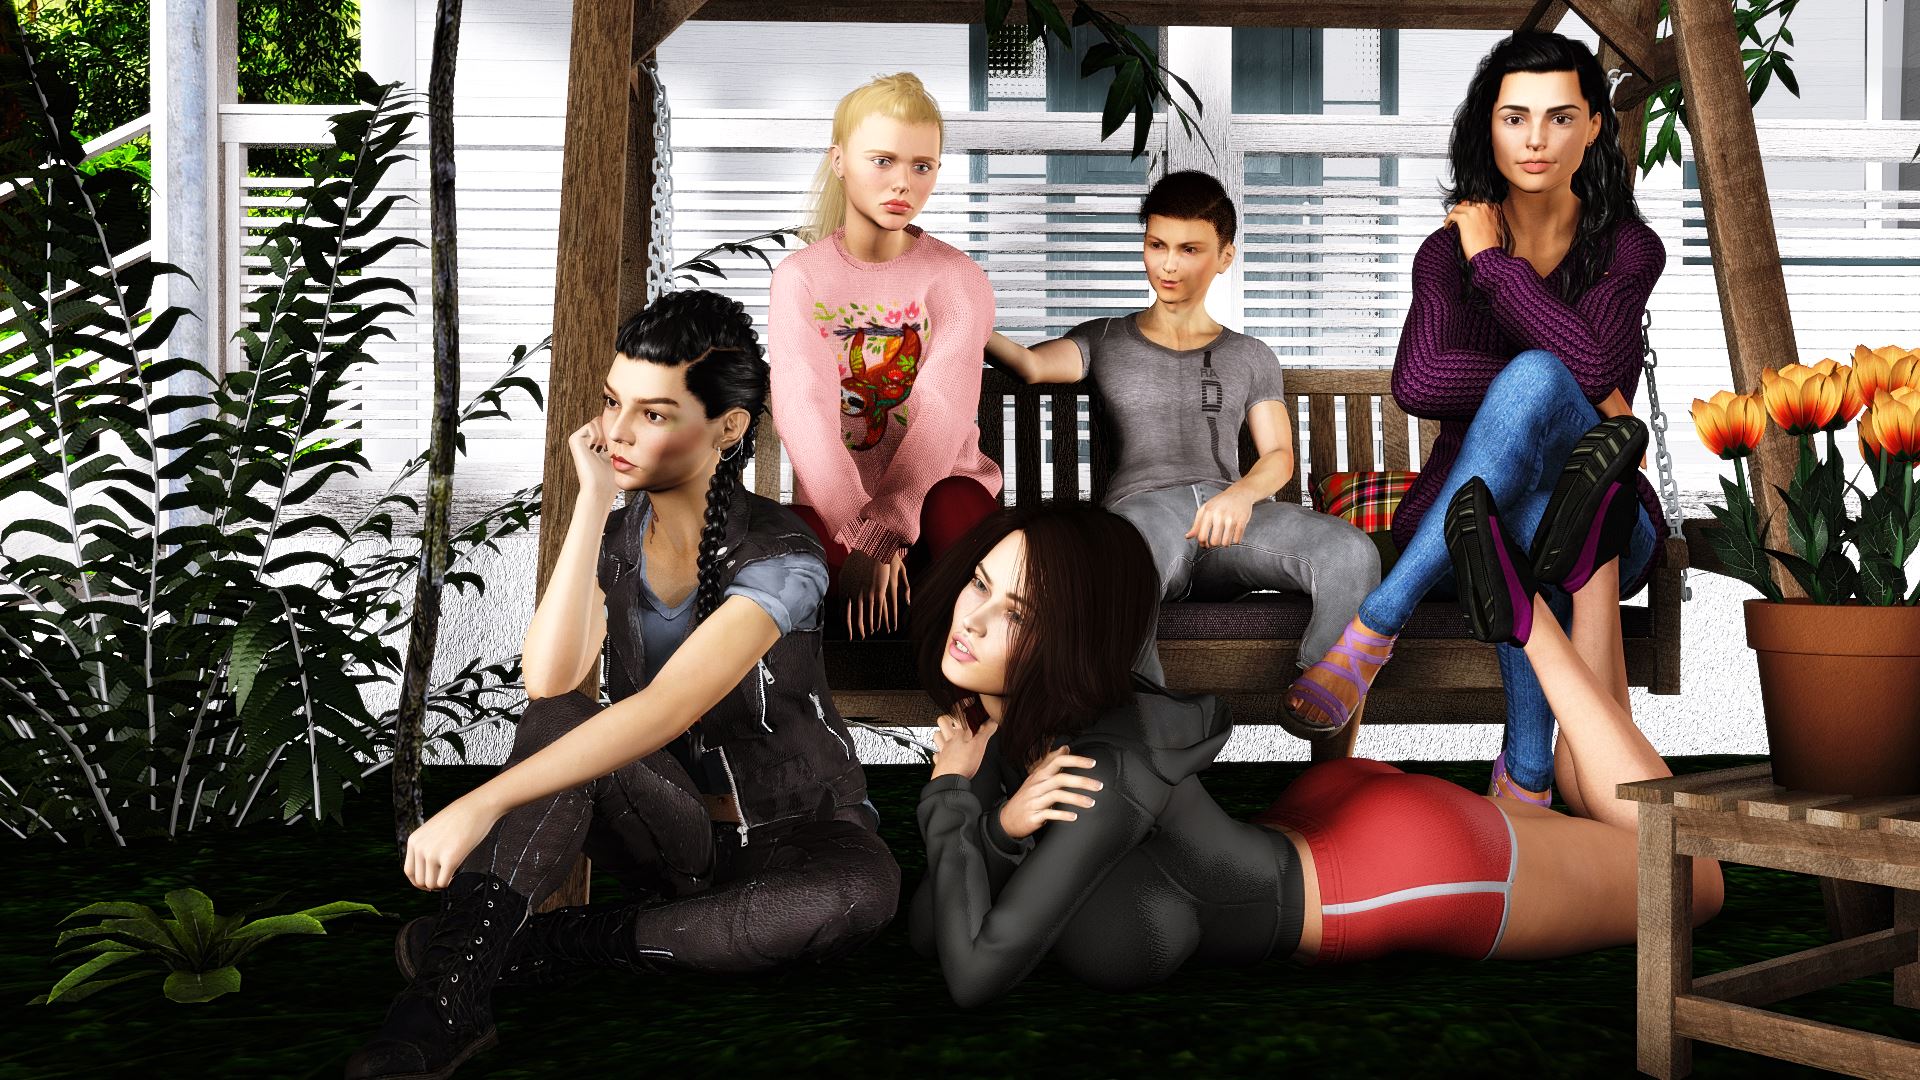 Xxx House Famli Dowlod - House of the Woods Ren'Py Porn Sex Game v.0.2 Download for Windows, MacOS,  Linux